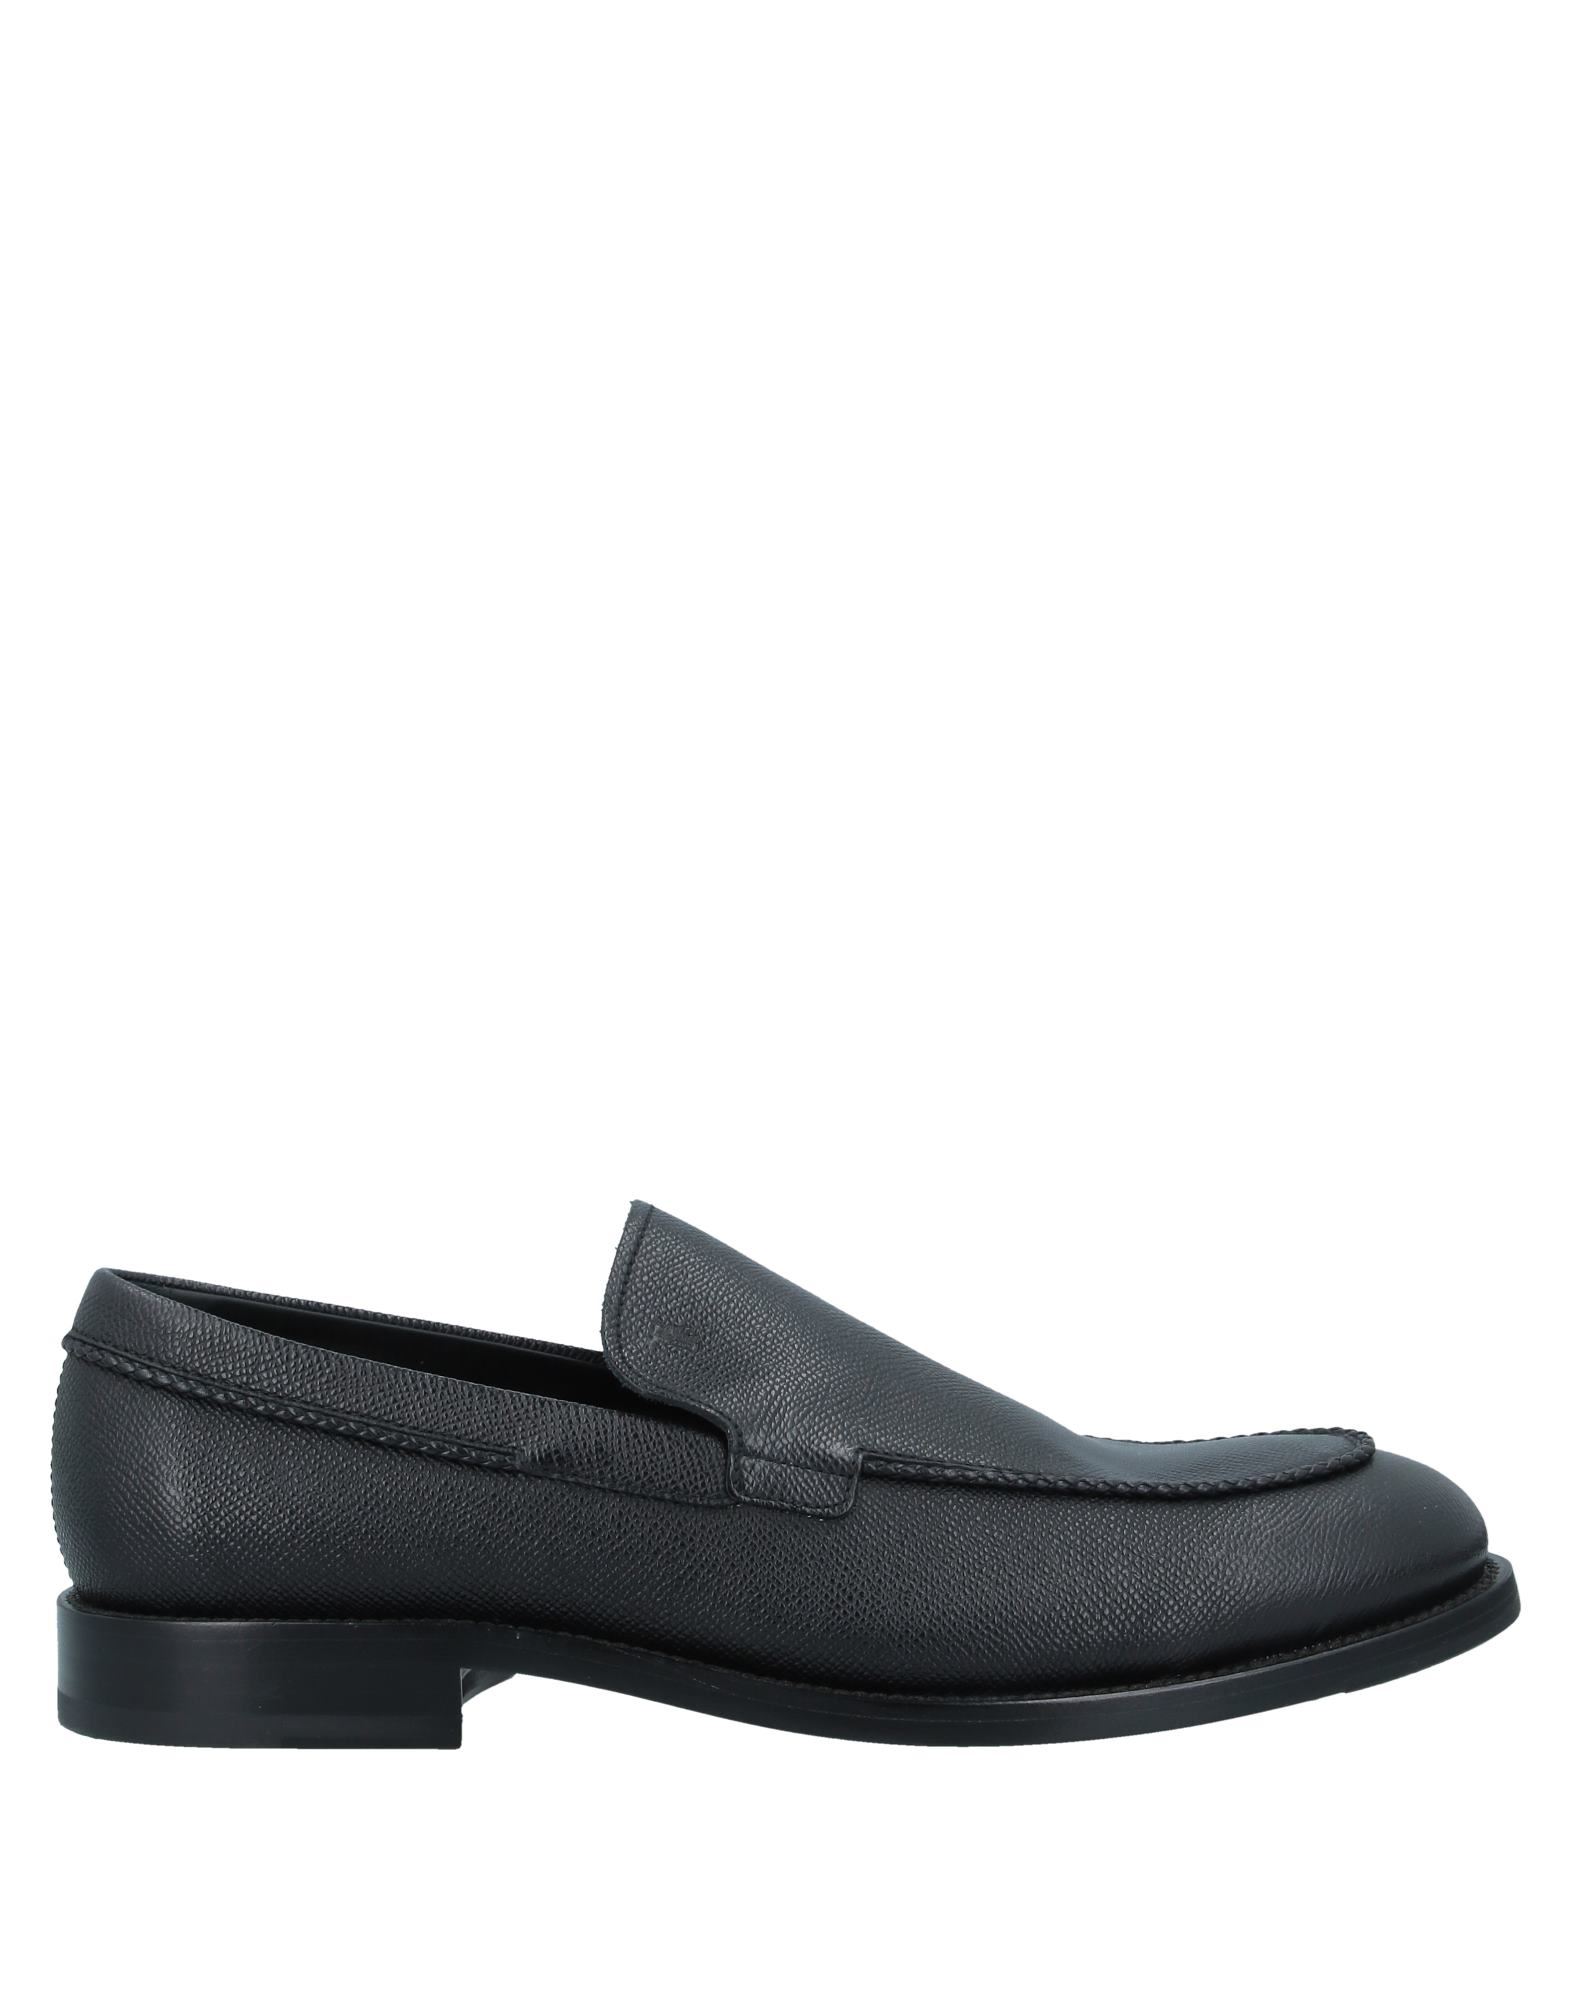 TOD'S Loafers | Smart Closet